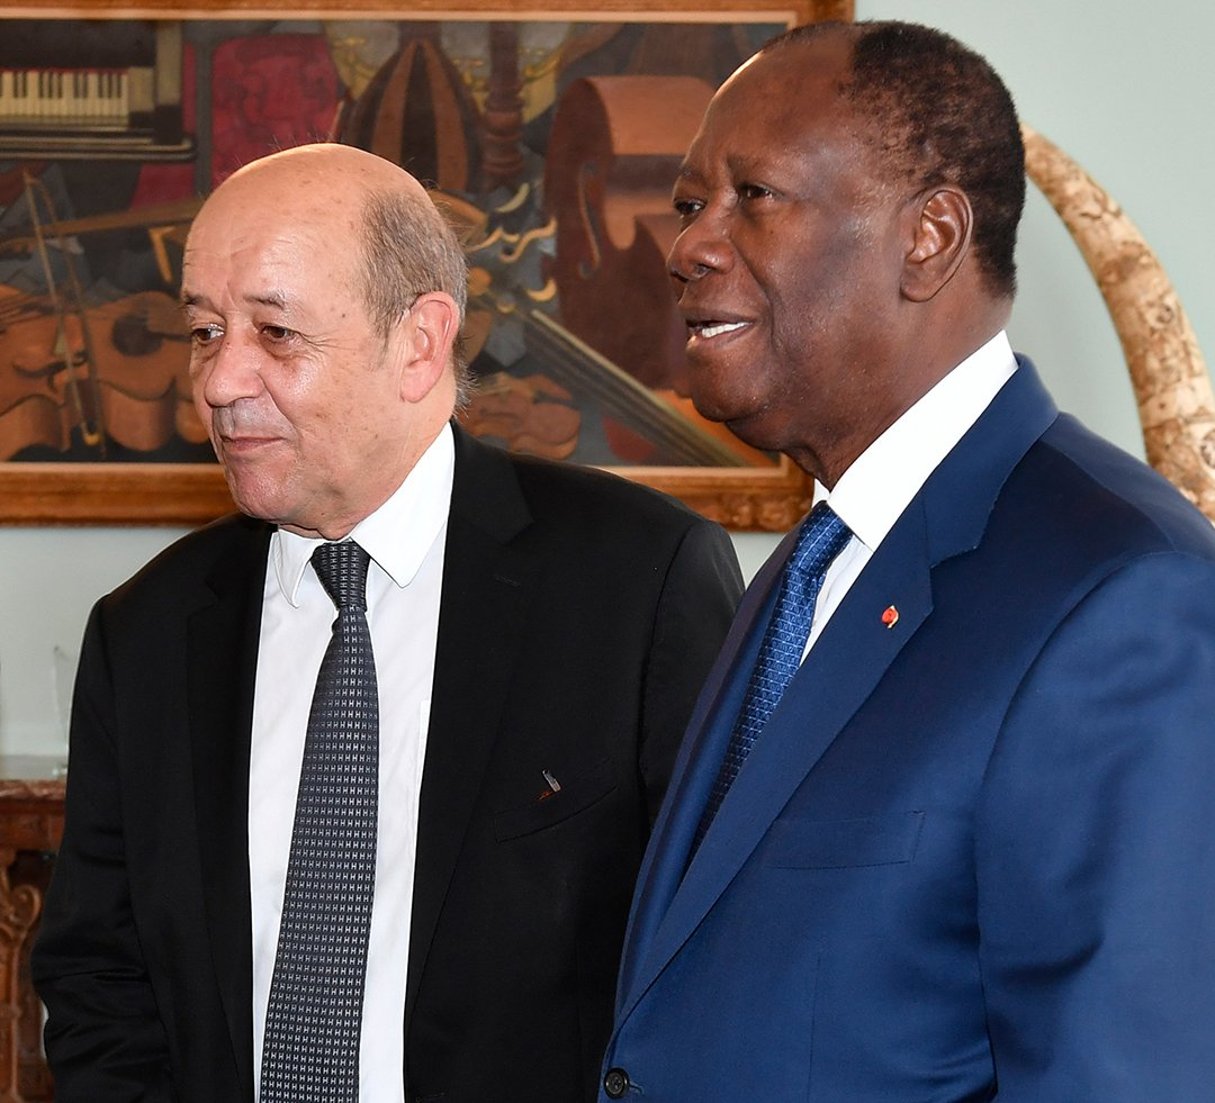 Jean-Yves Le Drian et Alassane Ouattara, en 2018. France’s Minister for Foreign Affairs Jean-Yves Le Drian (L) stands past Ivory Coast’s President Alassane Ouattara upon his arrival at the presidential palace in Abidjan on October 18, 2018. 
© ISSOUF SANOGO/AFP